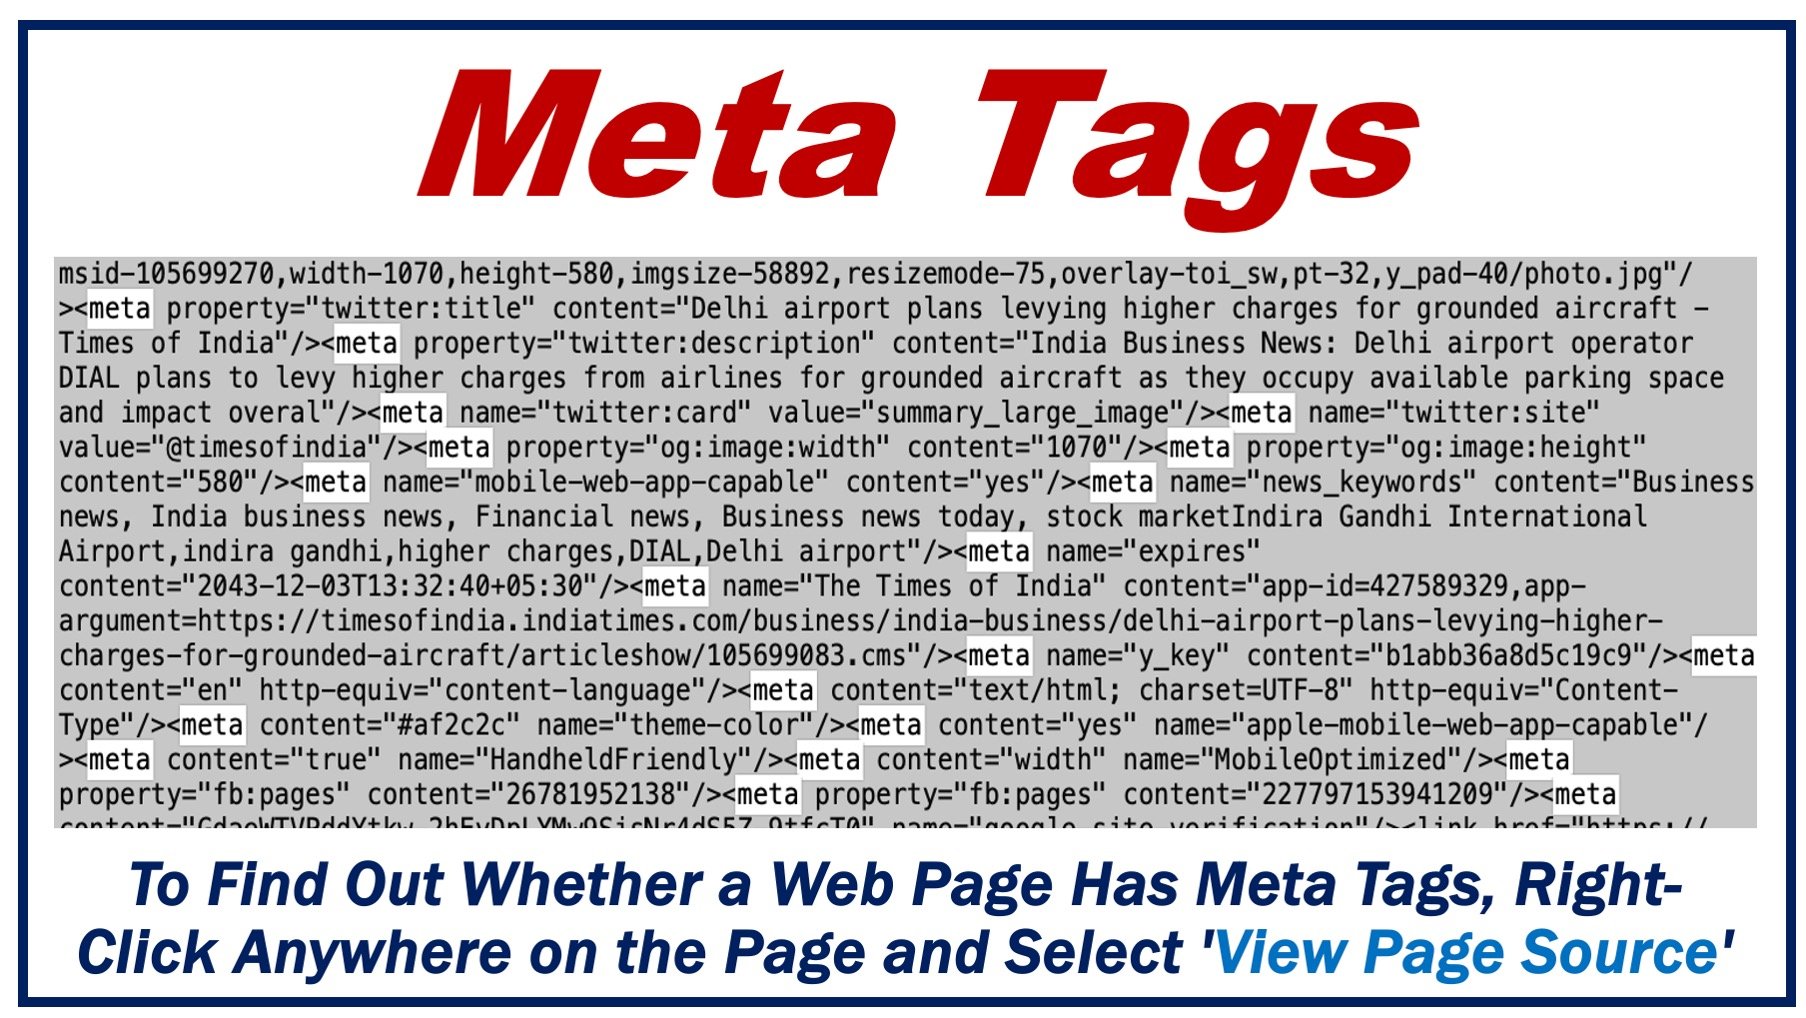 Image showing meta tags from a page source of a web page